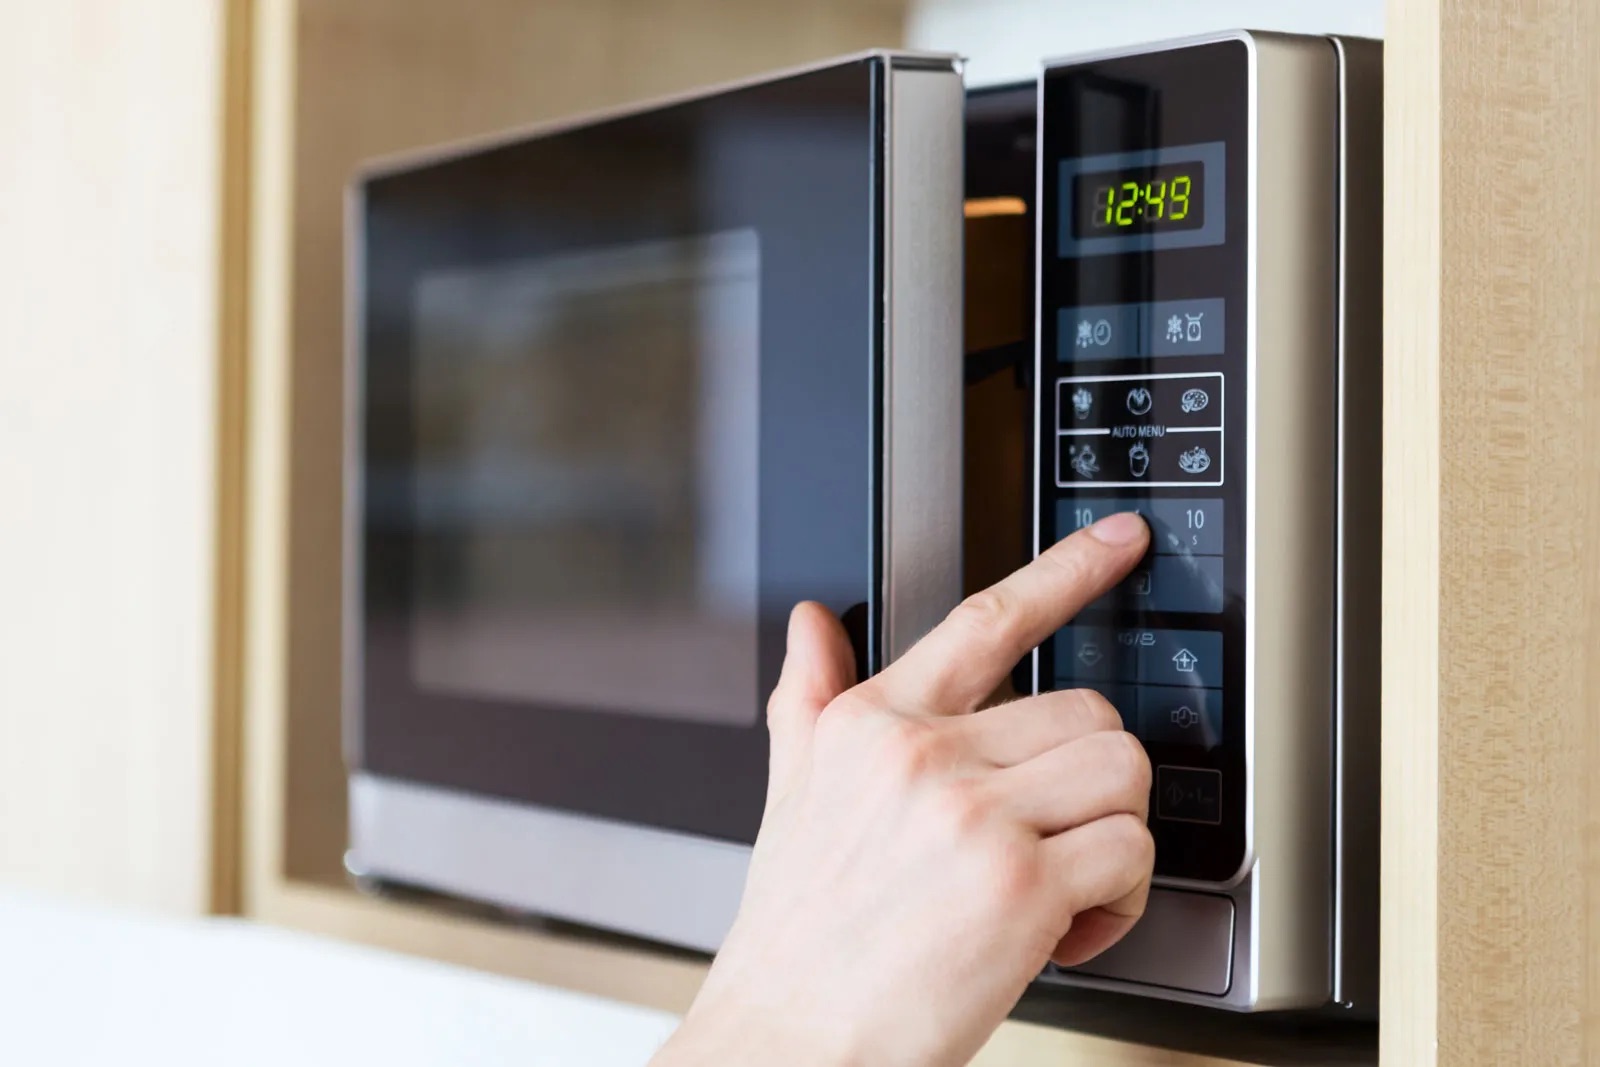 How Does A Microwave Oven Work